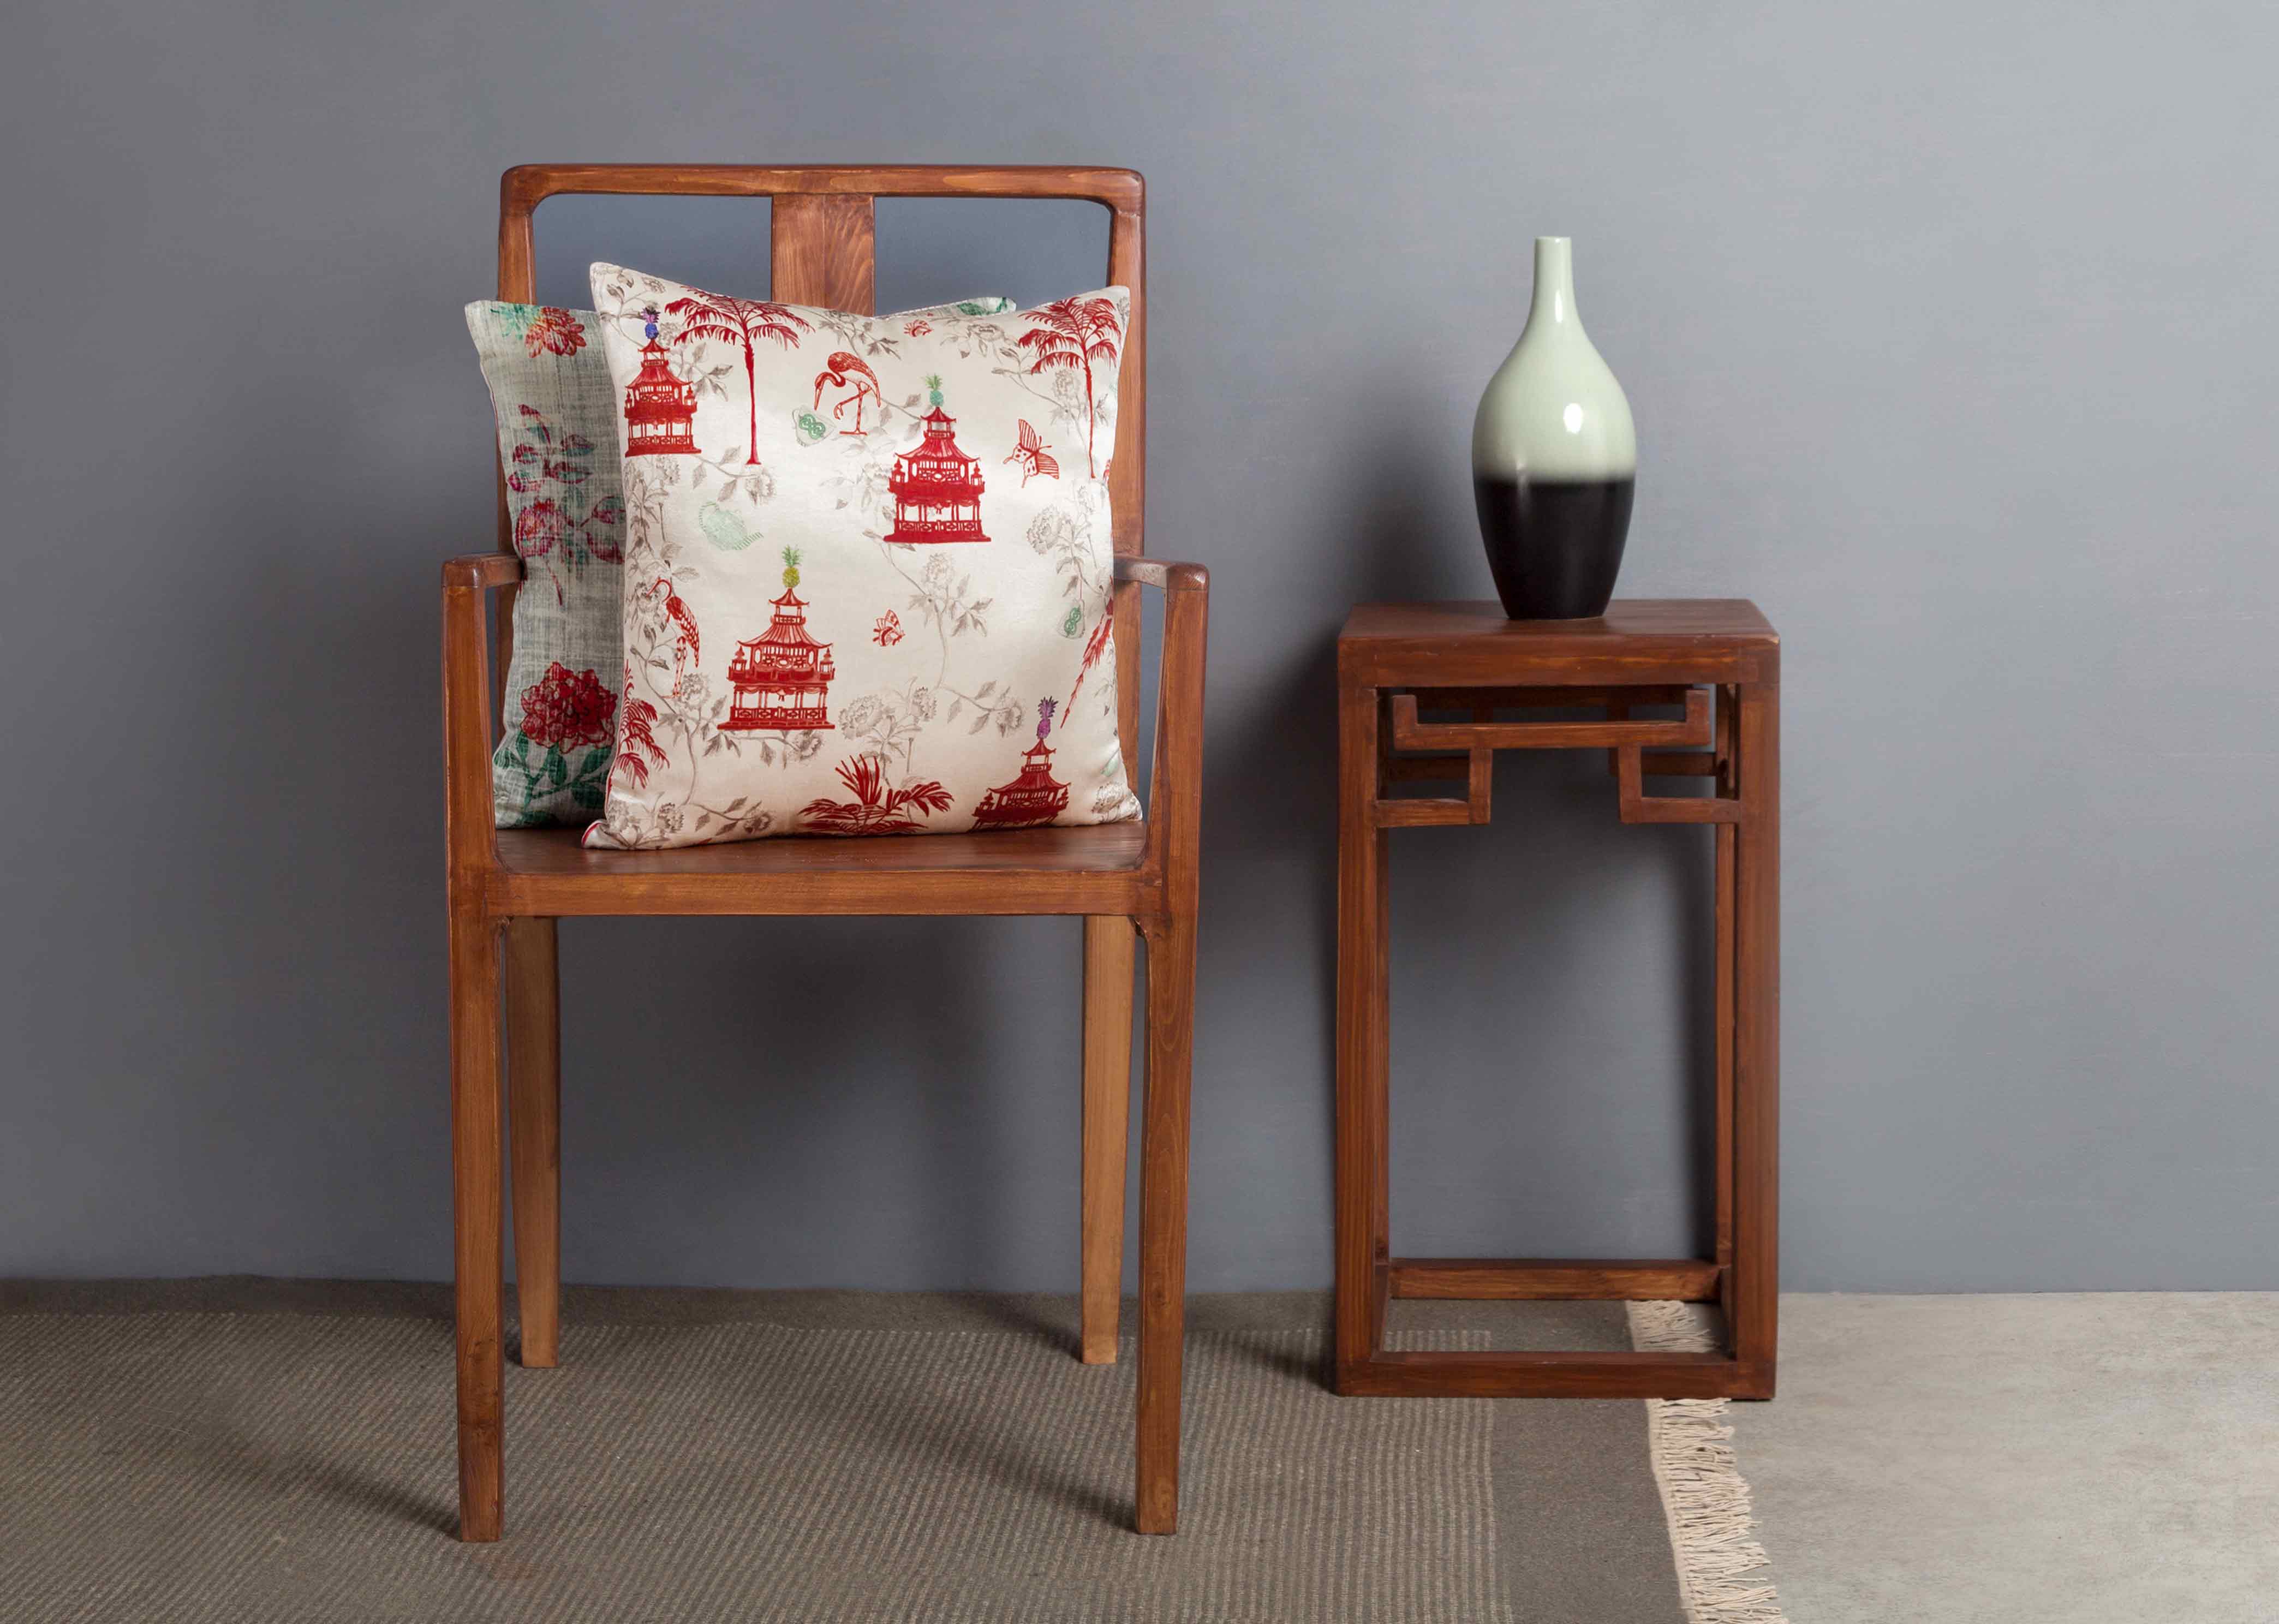 Chinoiserie Cushion Cover - Red